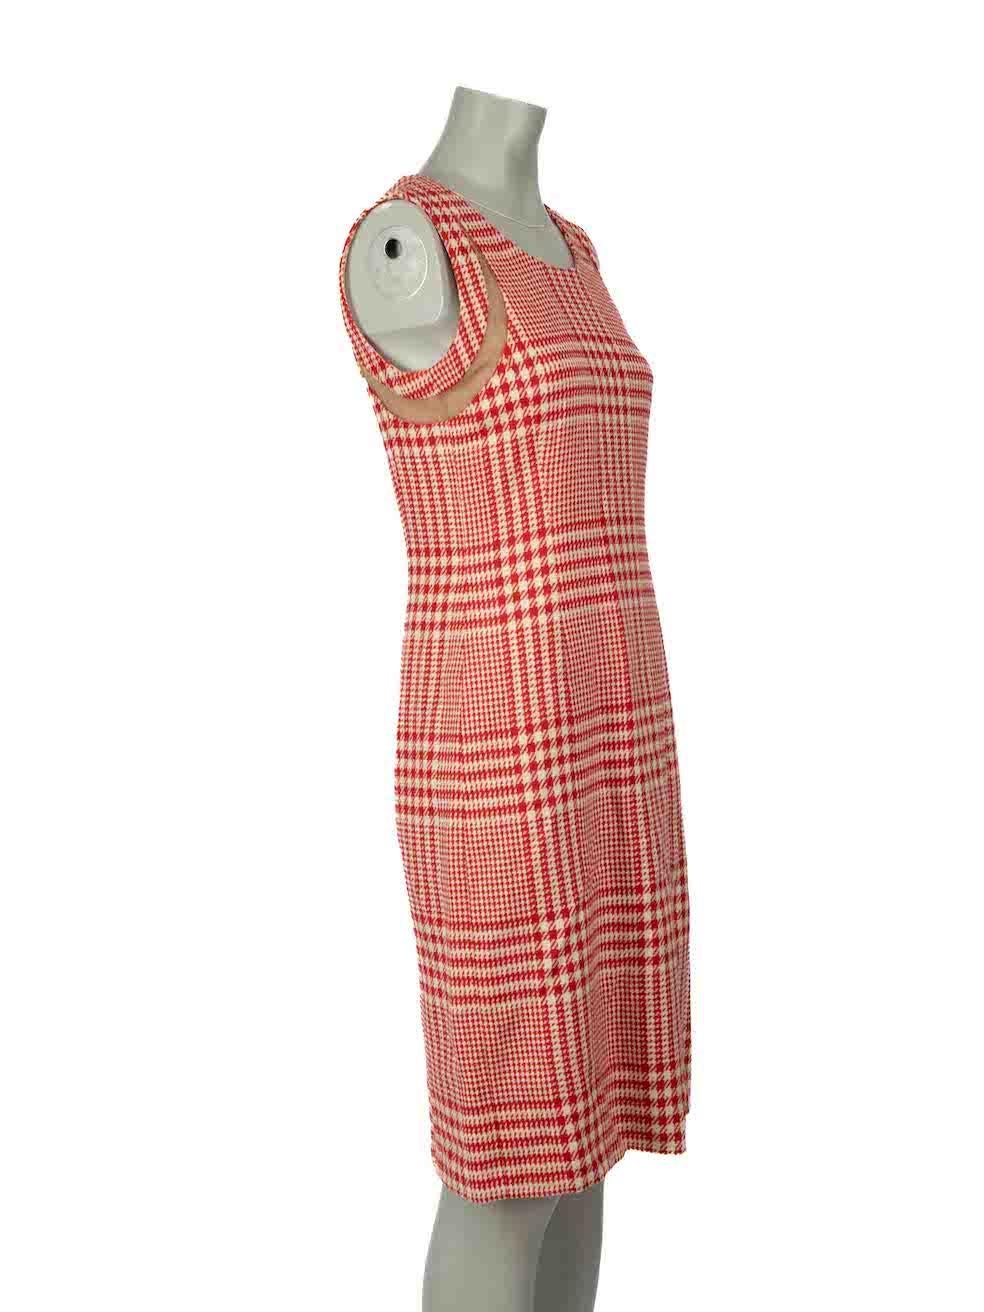 CONDITION is Very good. Hardly any visible wear to dress is evident on this used Versace designer resale item. This item comes with original hanger.

Details
Red
Synthetic
Dress
Houndstooth pattern
Sleeveless
Round neck
Knee length
Mesh